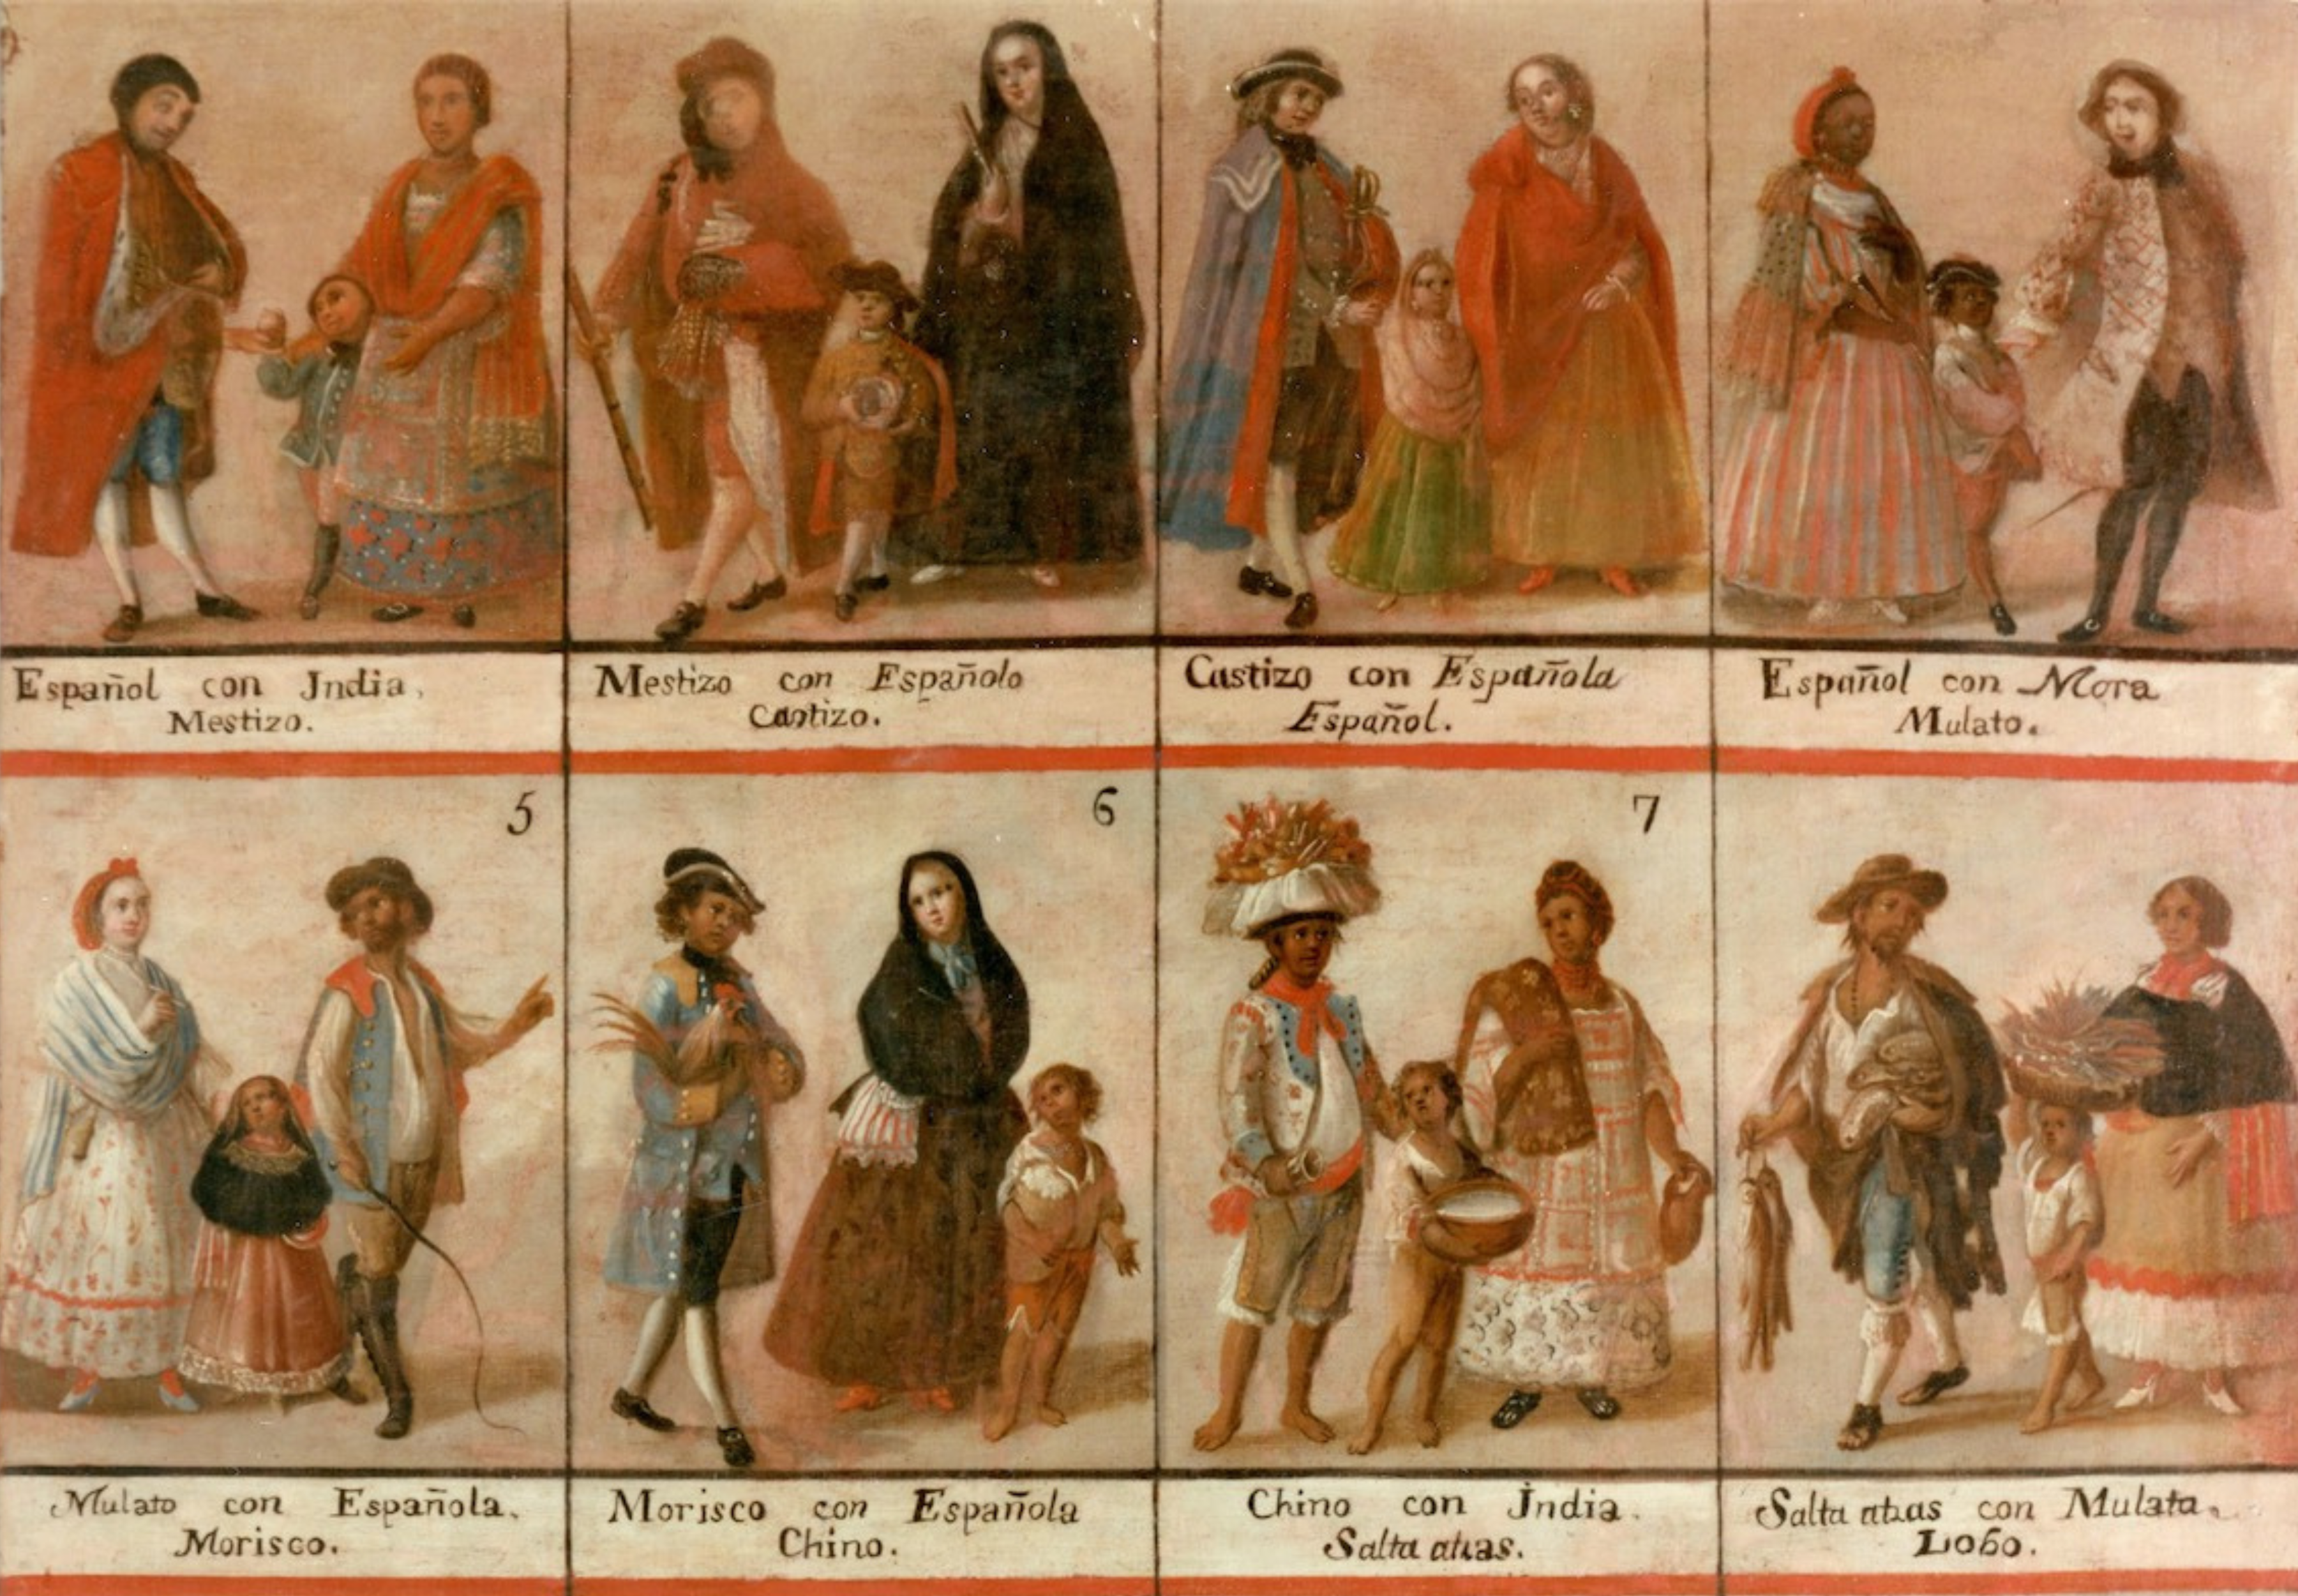 Eight families depicted with different skins tones and dress  